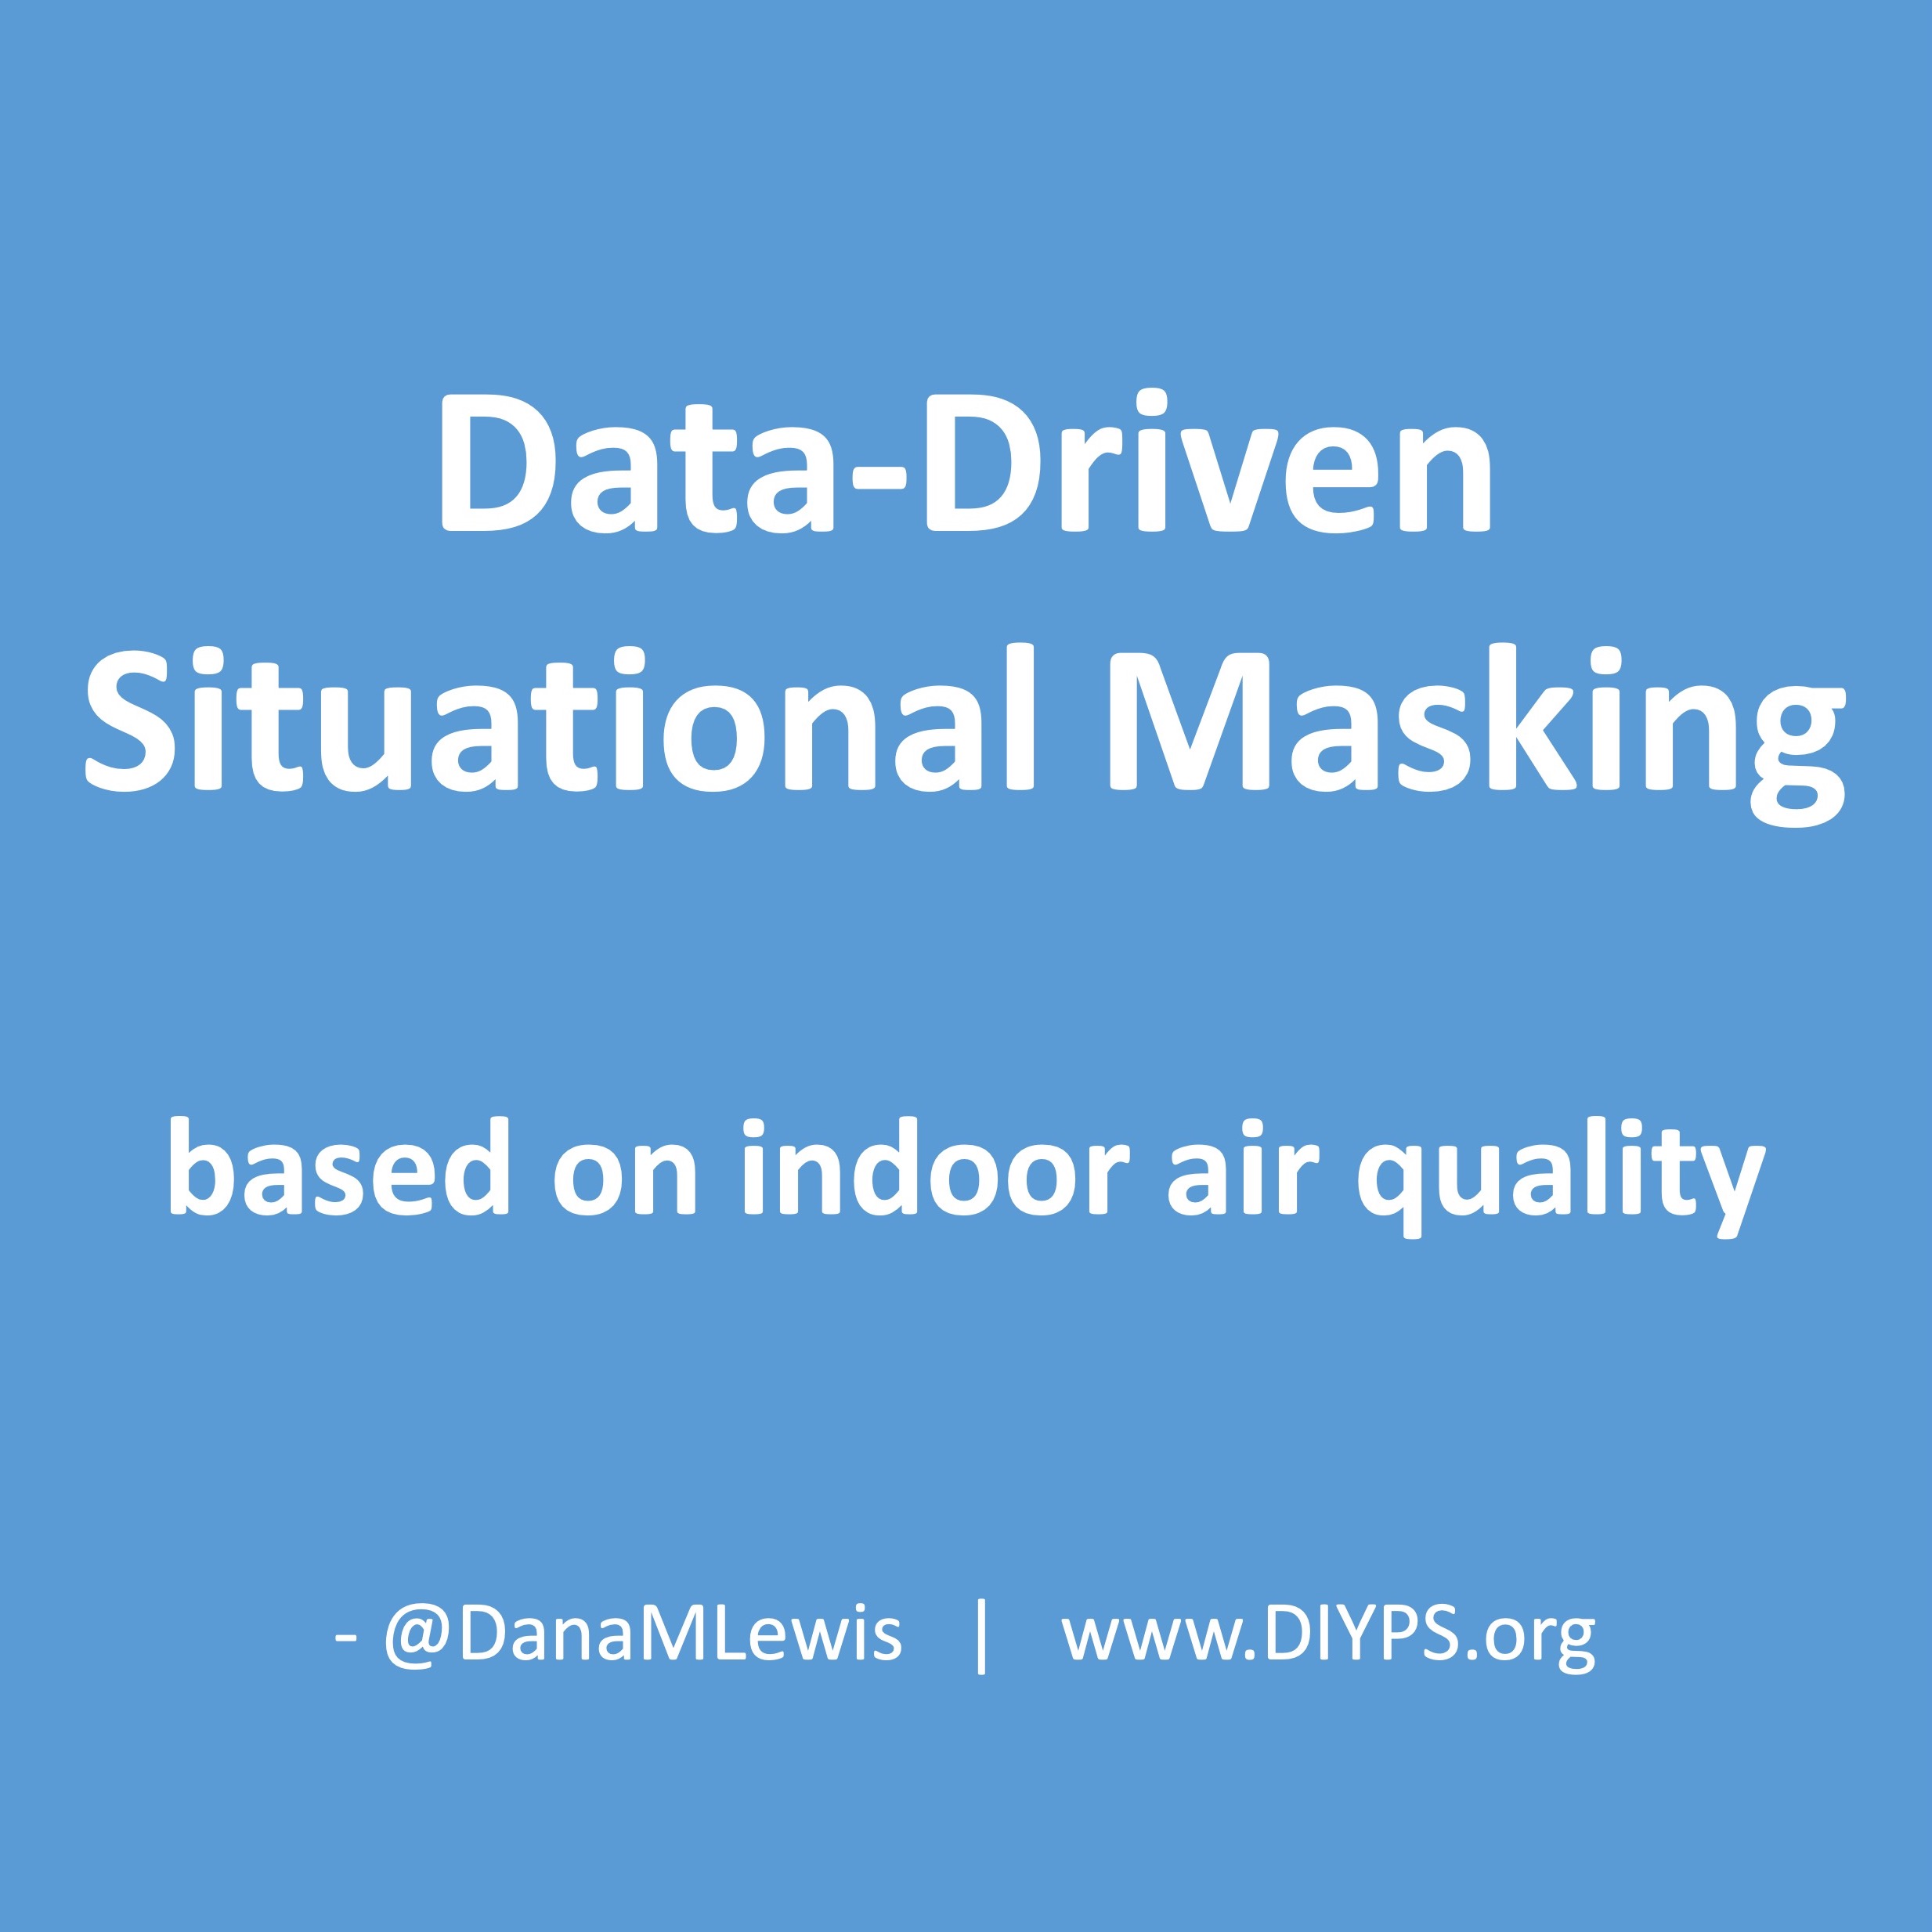 Data-driven situational masking based on indoor air quality